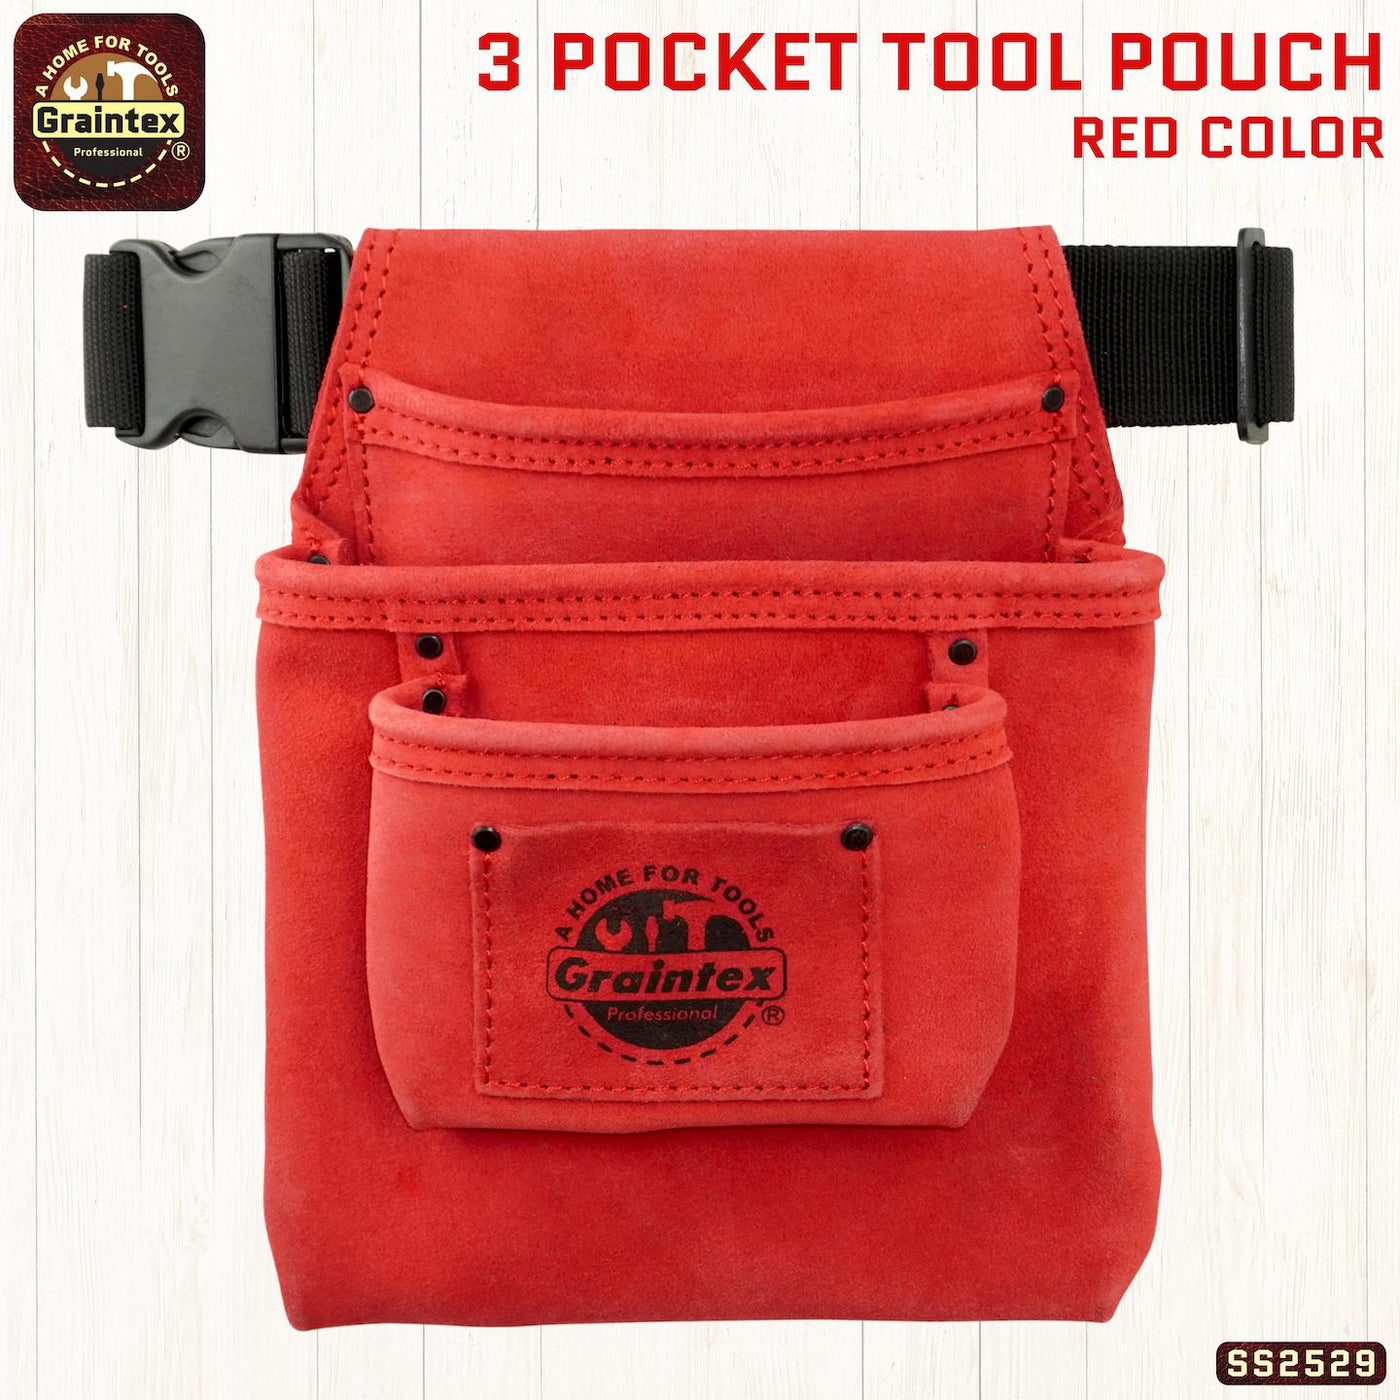 SS2529 :: 3 Pocket Nail & Tool Pouch Red Color Suede Leather with Belt